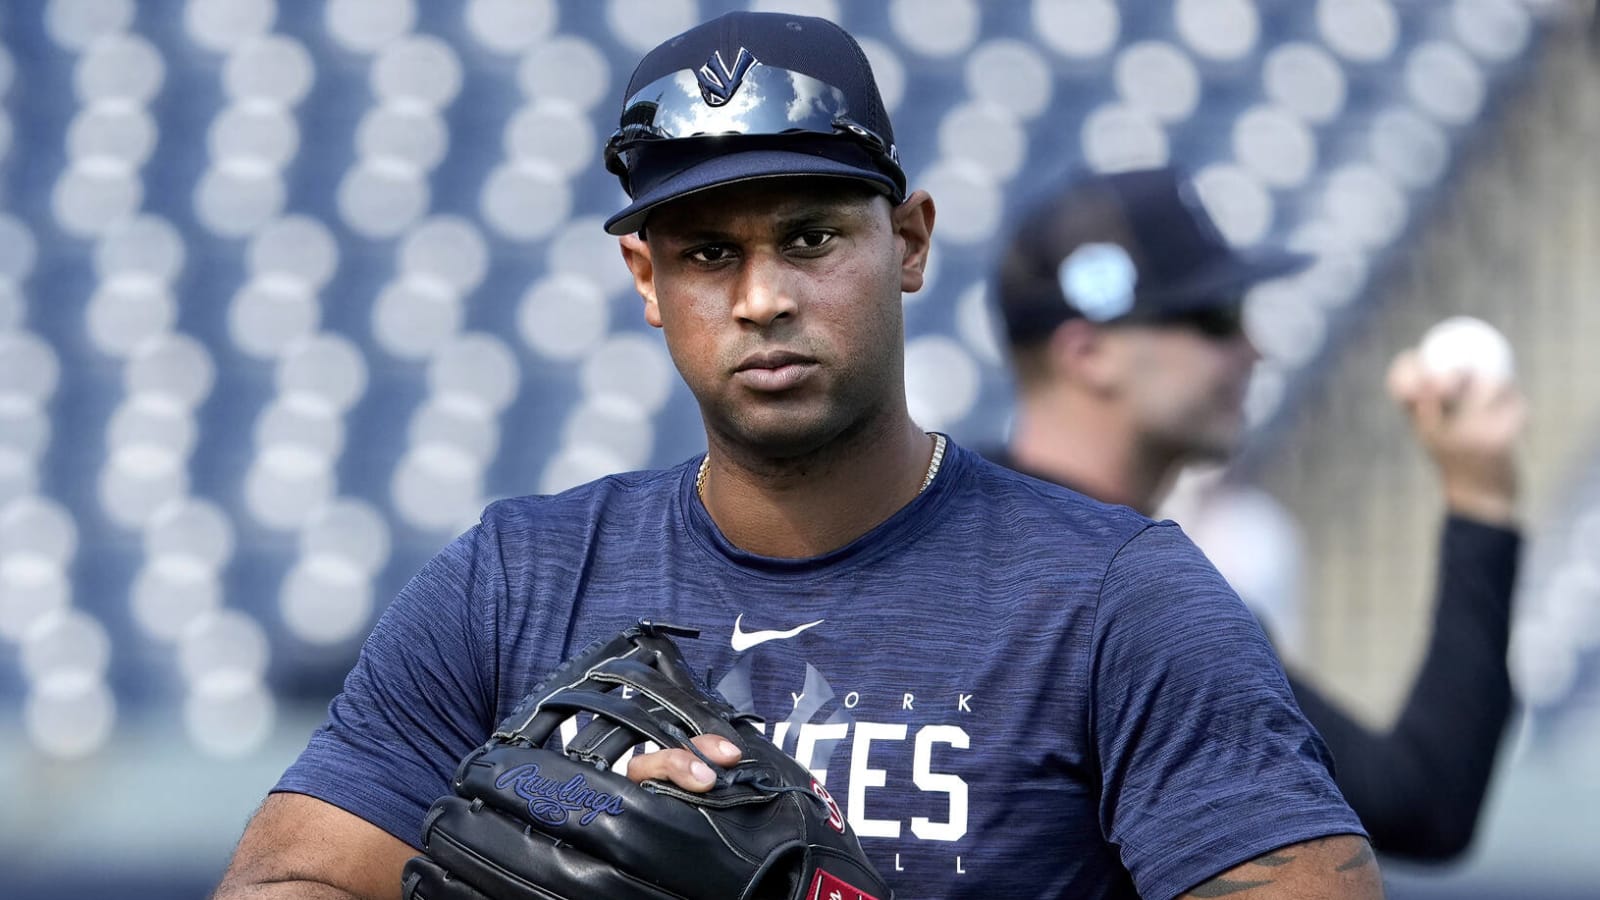 Orioles sign former Yankees outfielder